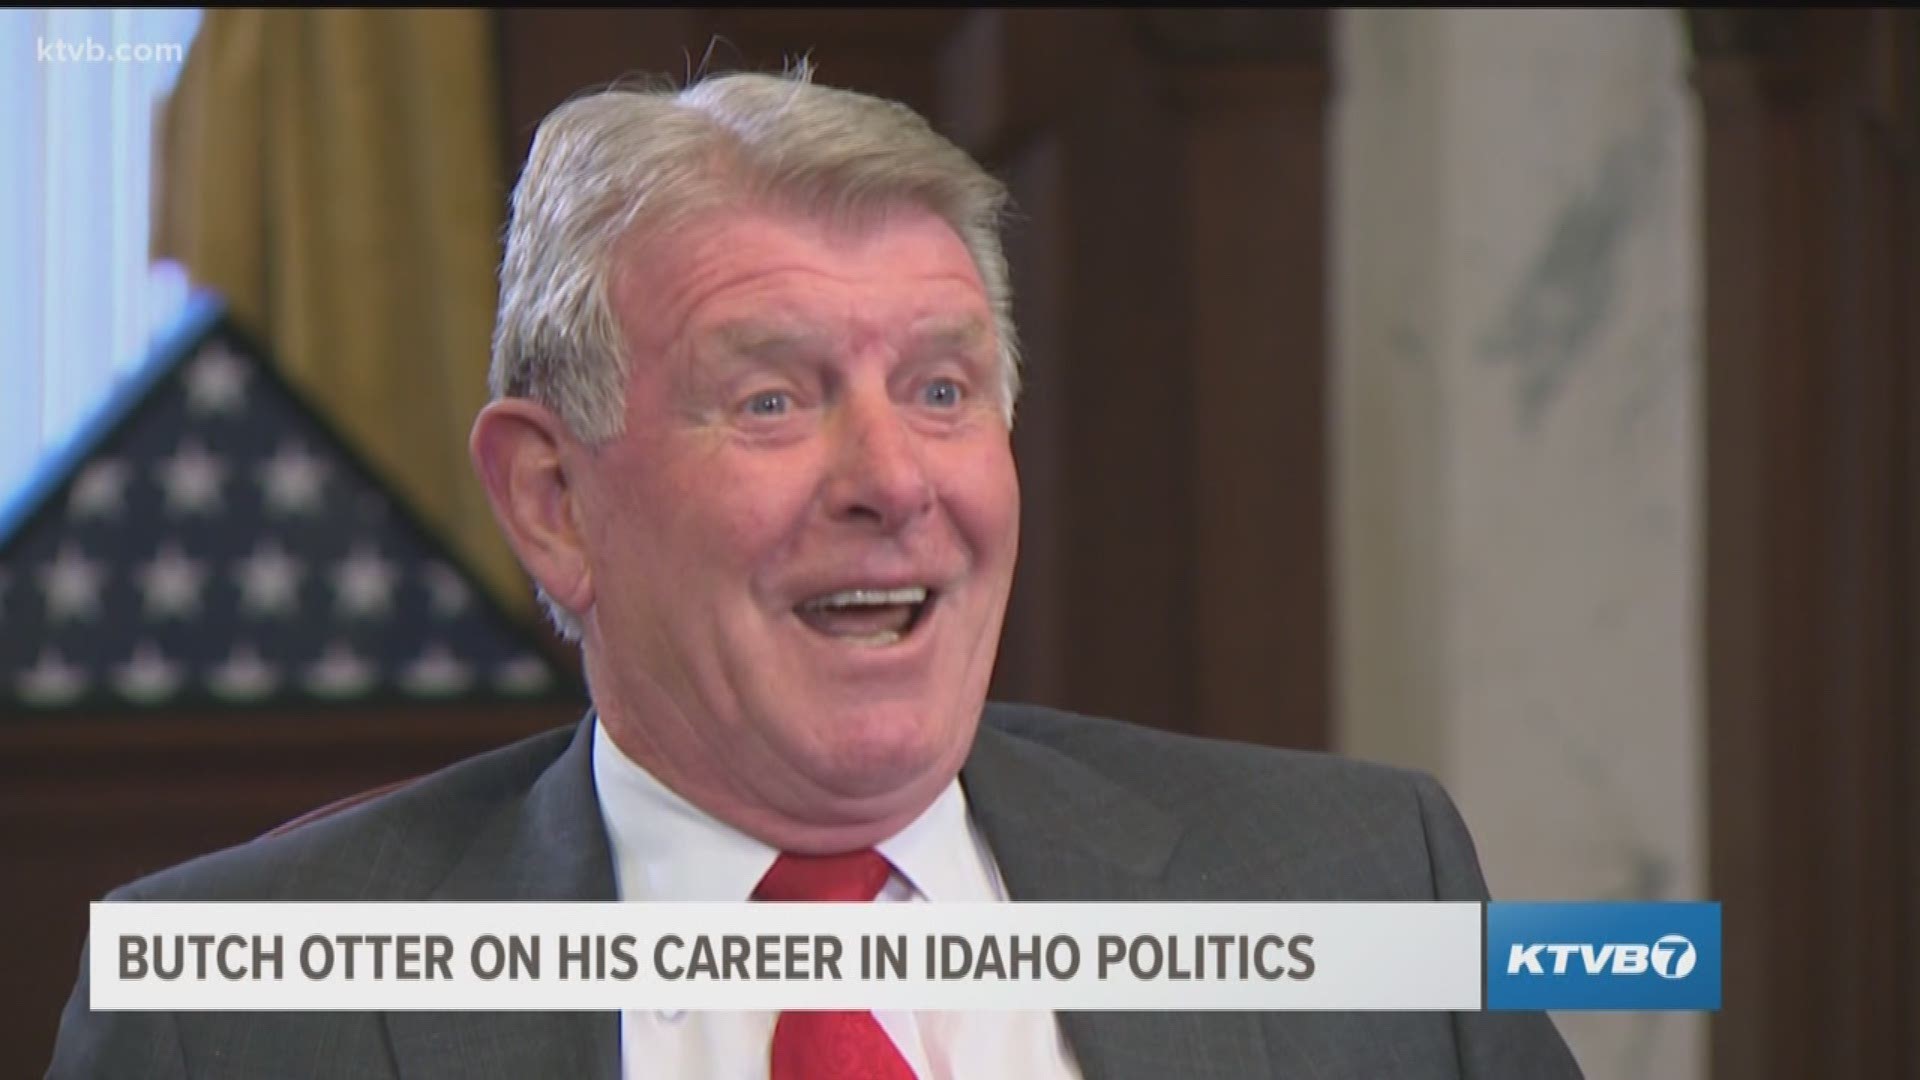 After 36 years in public office, including the last 12 years as Idaho's governor, Butch Otter steps away from the Statehouse at the end of this year. In this week's Viewpoint, Mark Johnson sits down and interviews Governor Otter and discusses his past, present and future plans for himself and for the state that he has led for the last 12 years.